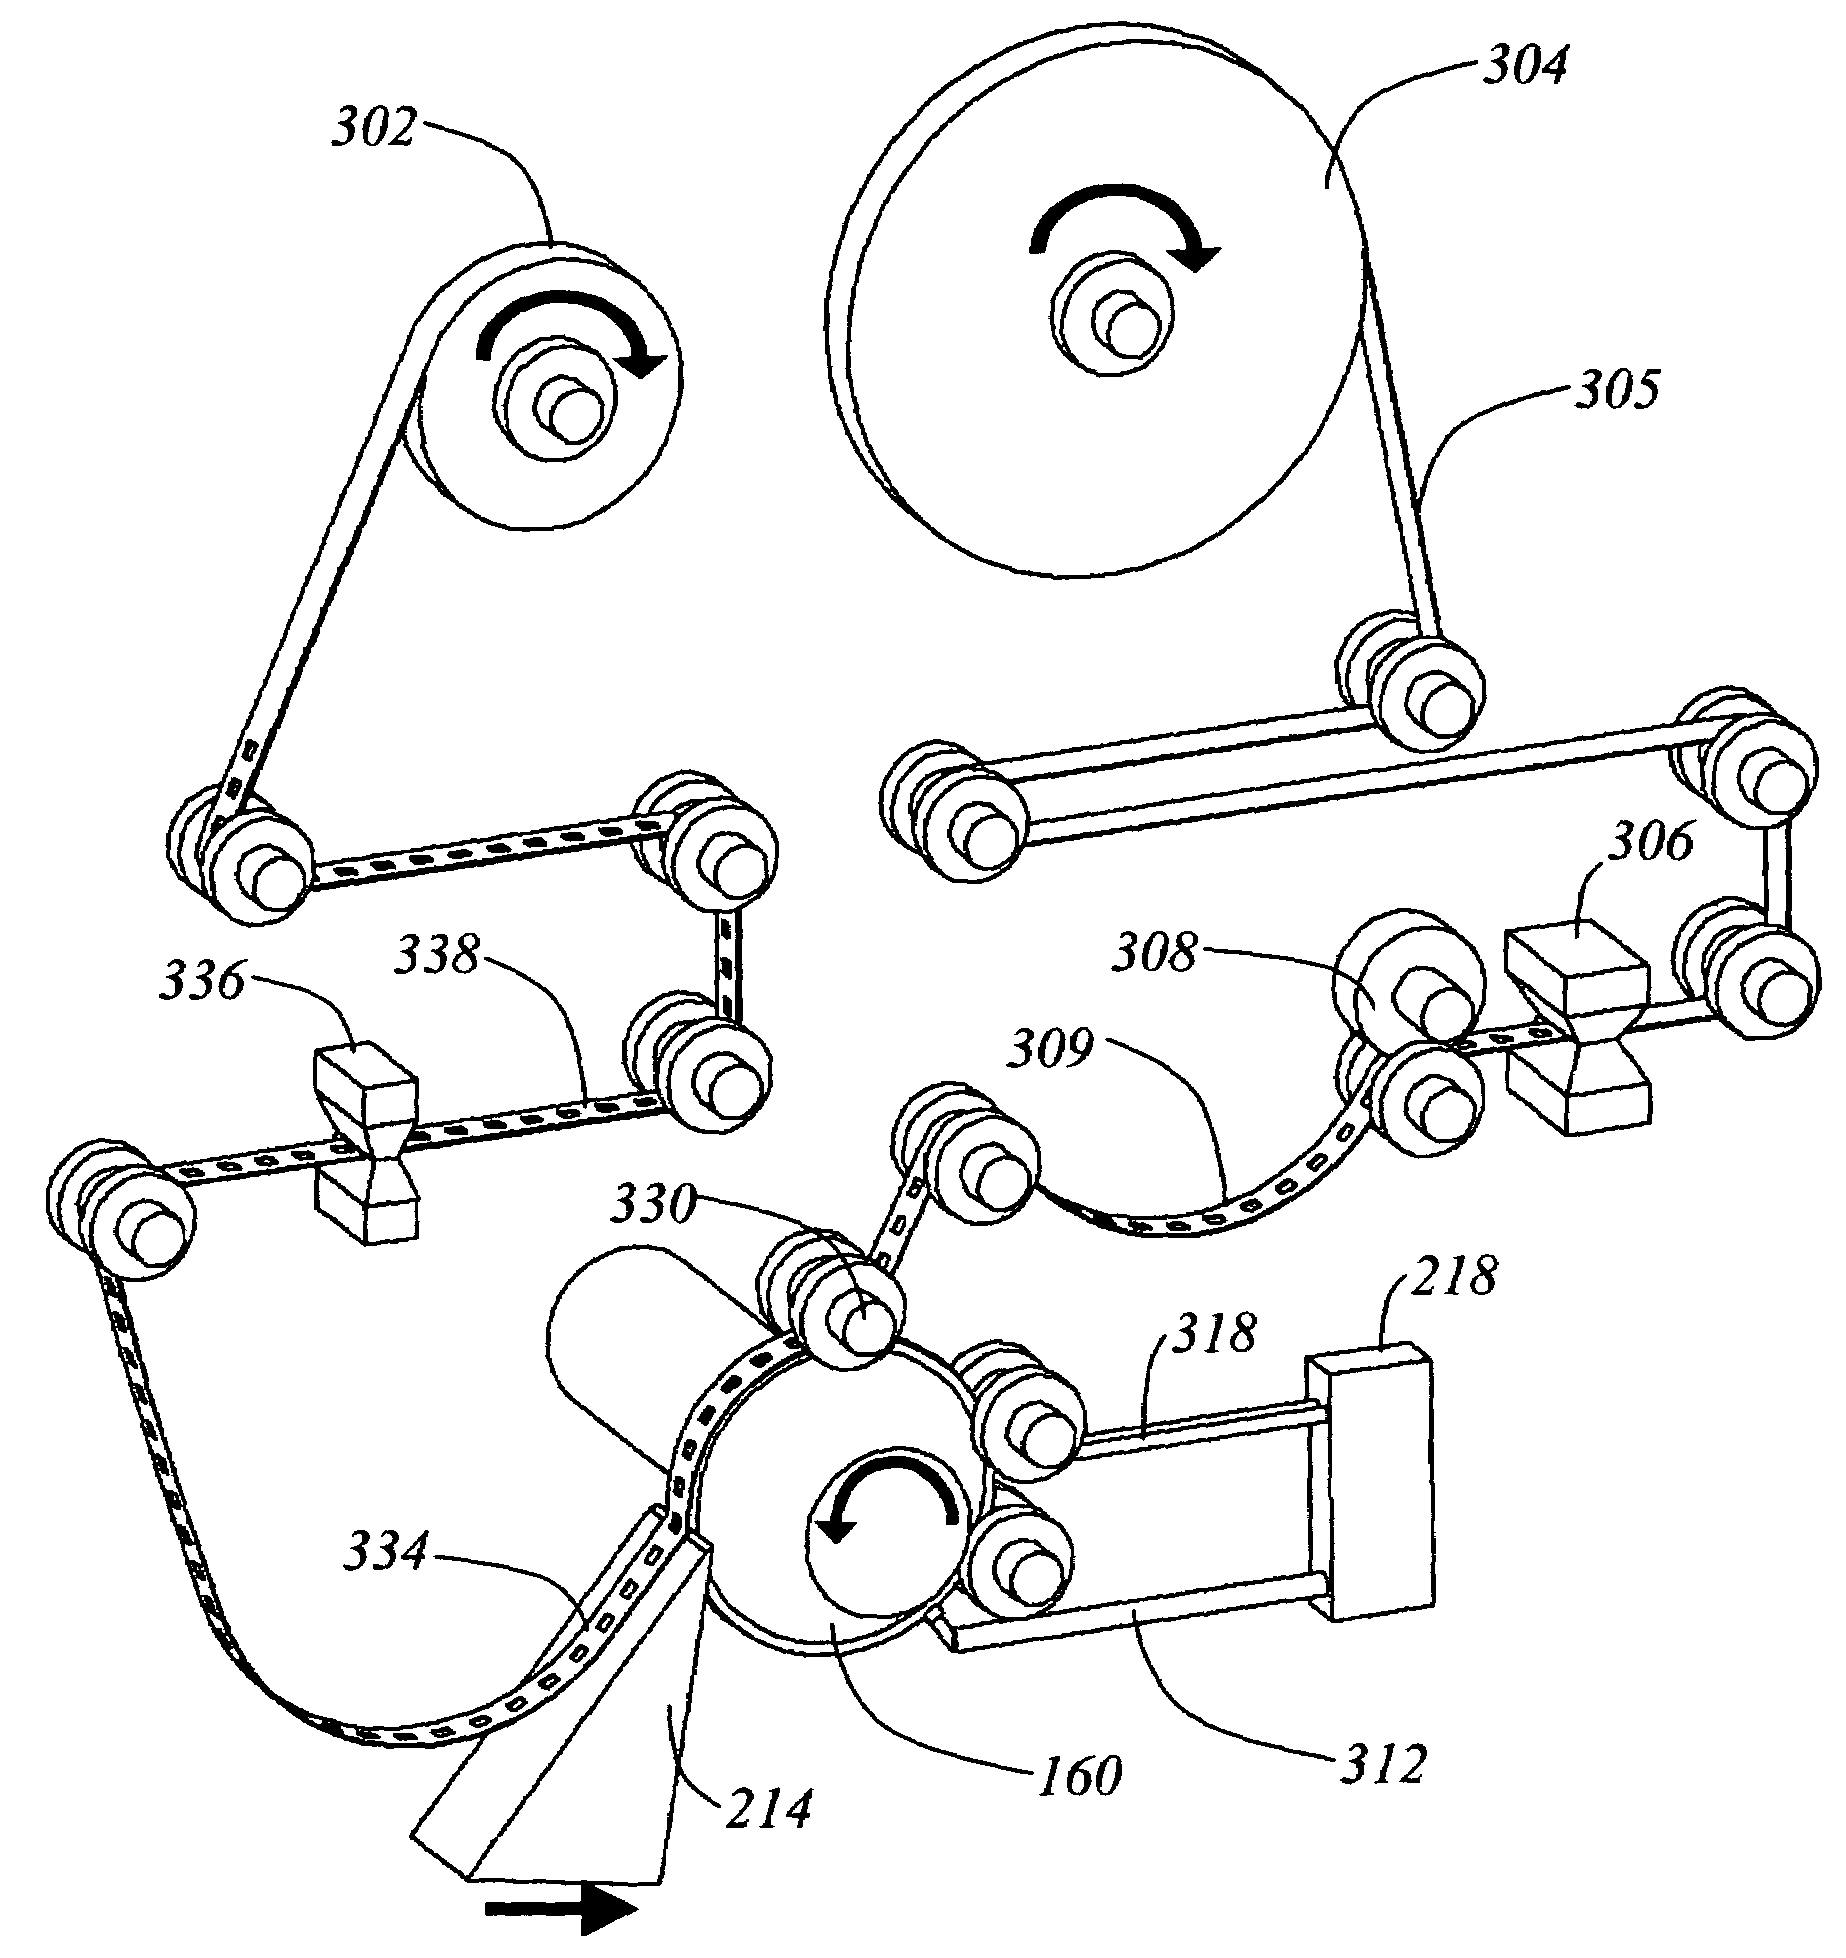 Methods and apparatuses for the automated production, collection, handling, and imaging of large numbers of serial tissue sections